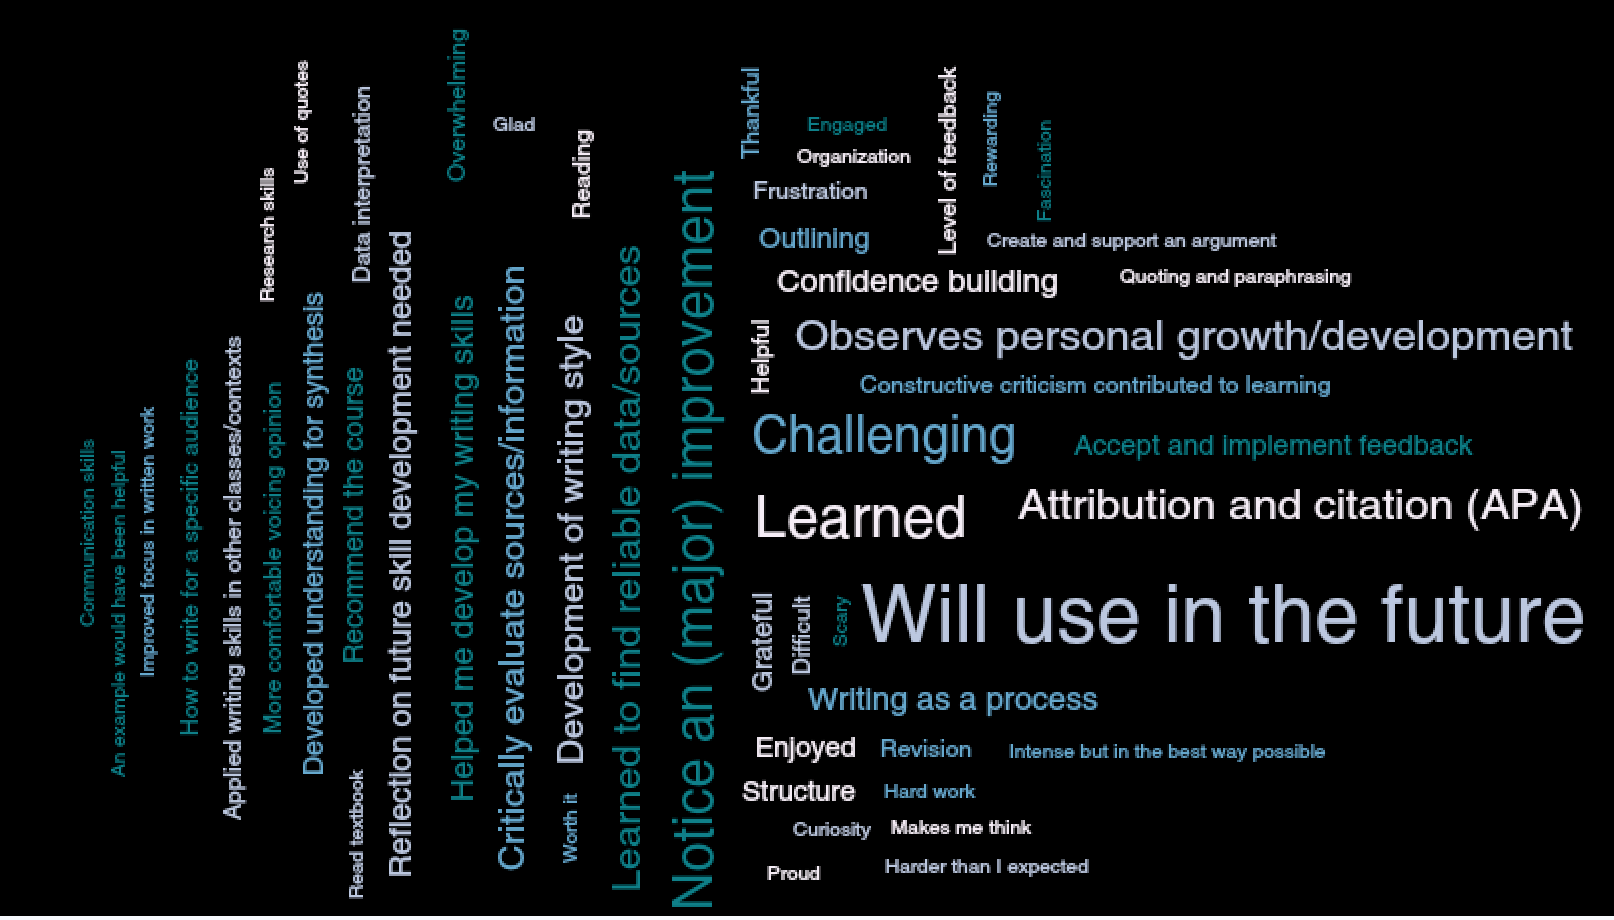 Figure 1: An image showing a word cloud based on the second round of data collection, with prominent themes represented with larger text. 'Will use in the future' is in the largest text, followed by 'learned,' 'challenging,' and 'notice a (major) improvement.' Other themes in smaller text are also noted.